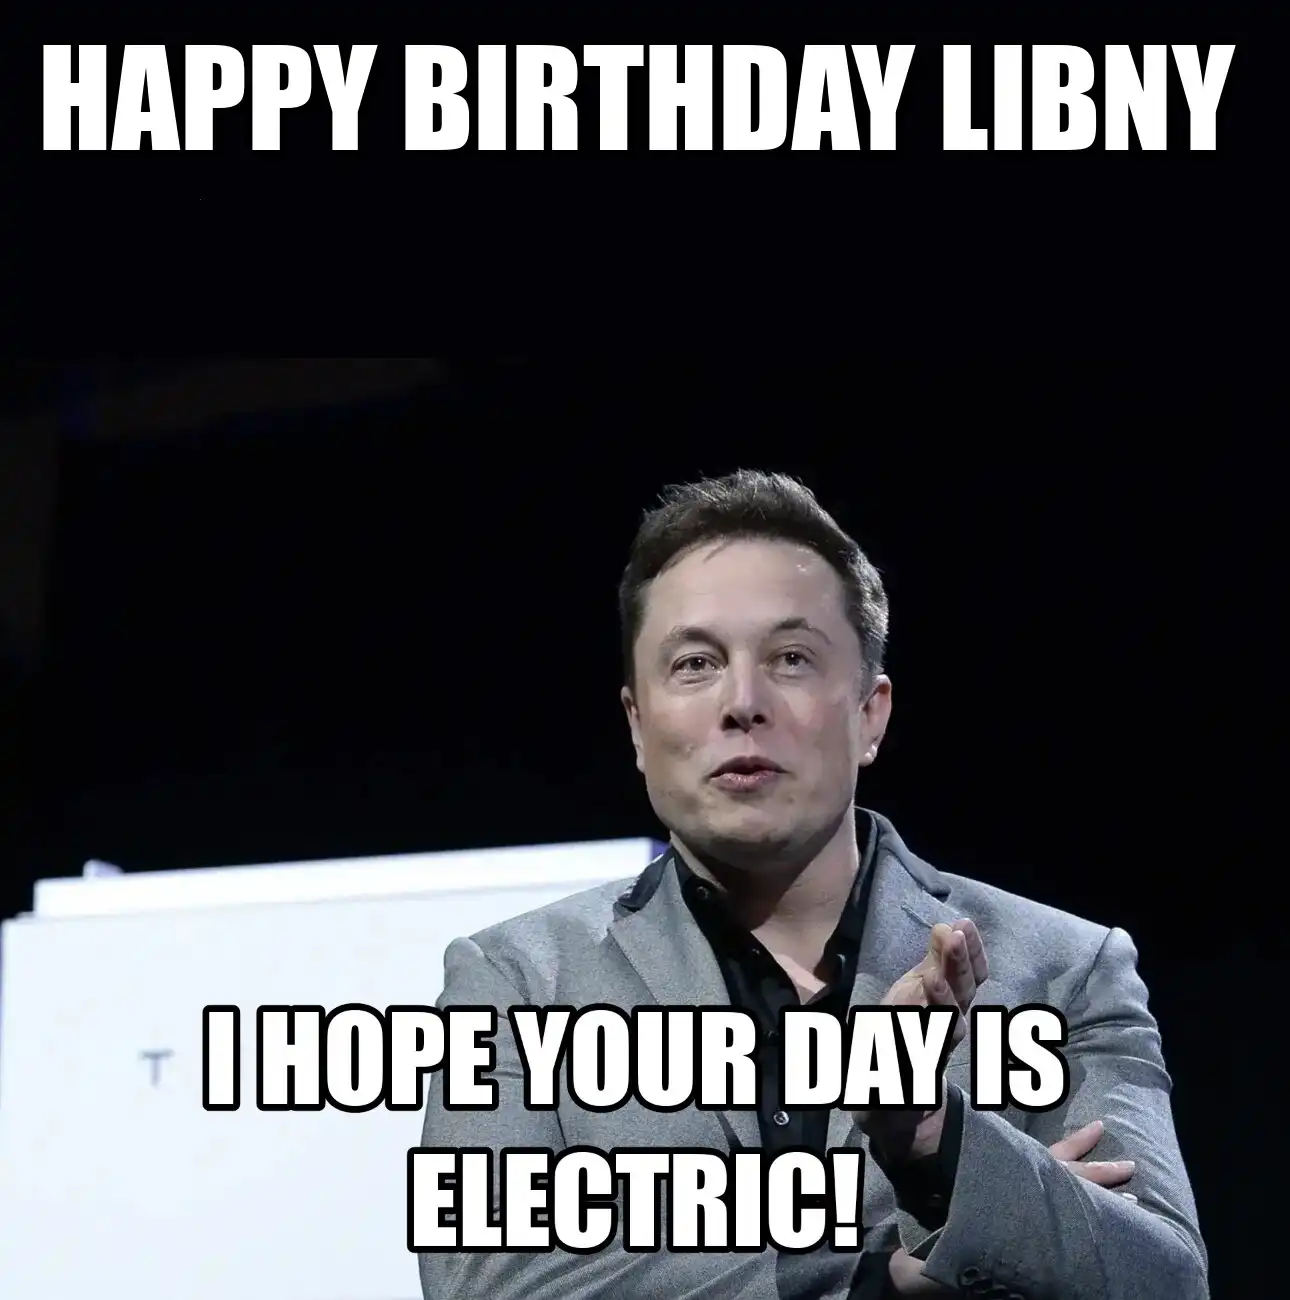 Happy Birthday Libny I Hope Your Day Is Electric Meme